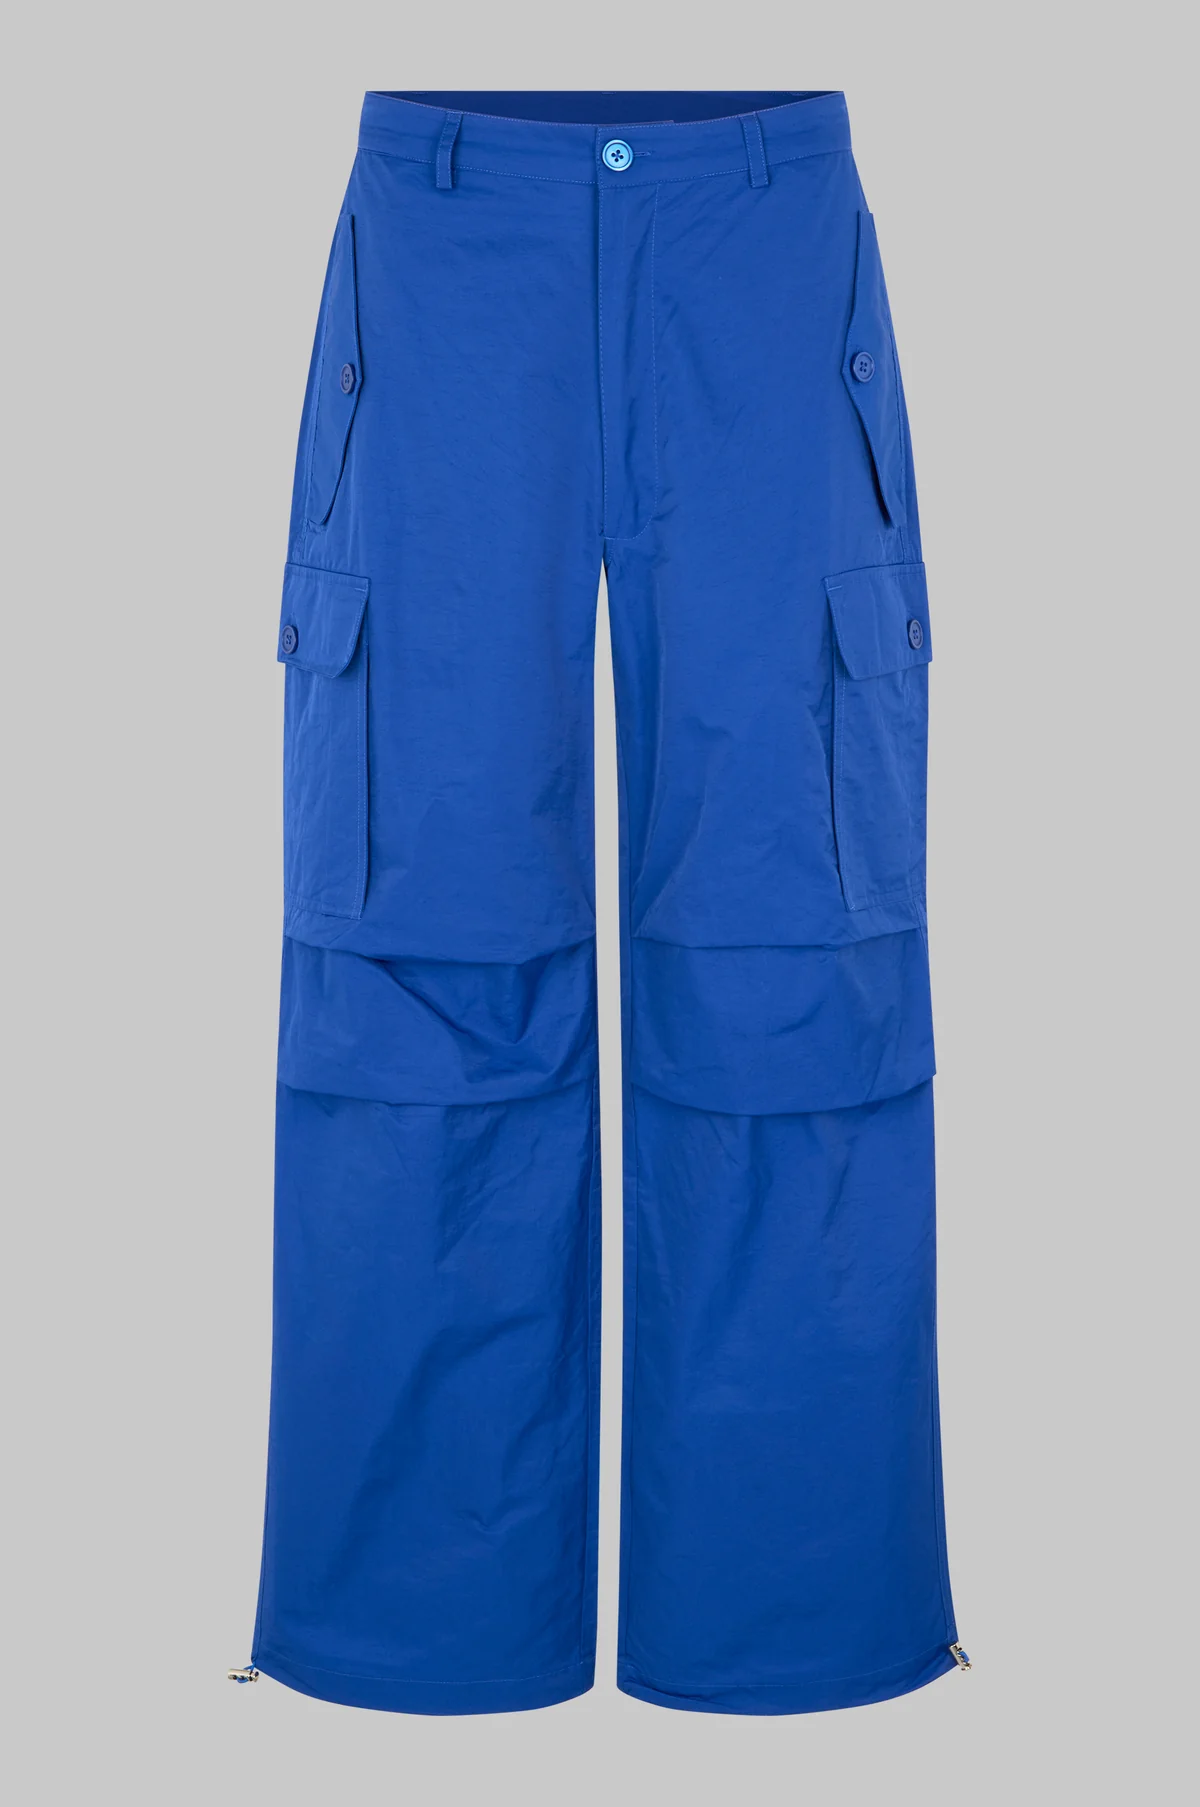 OVAL SQUARE Os work pants